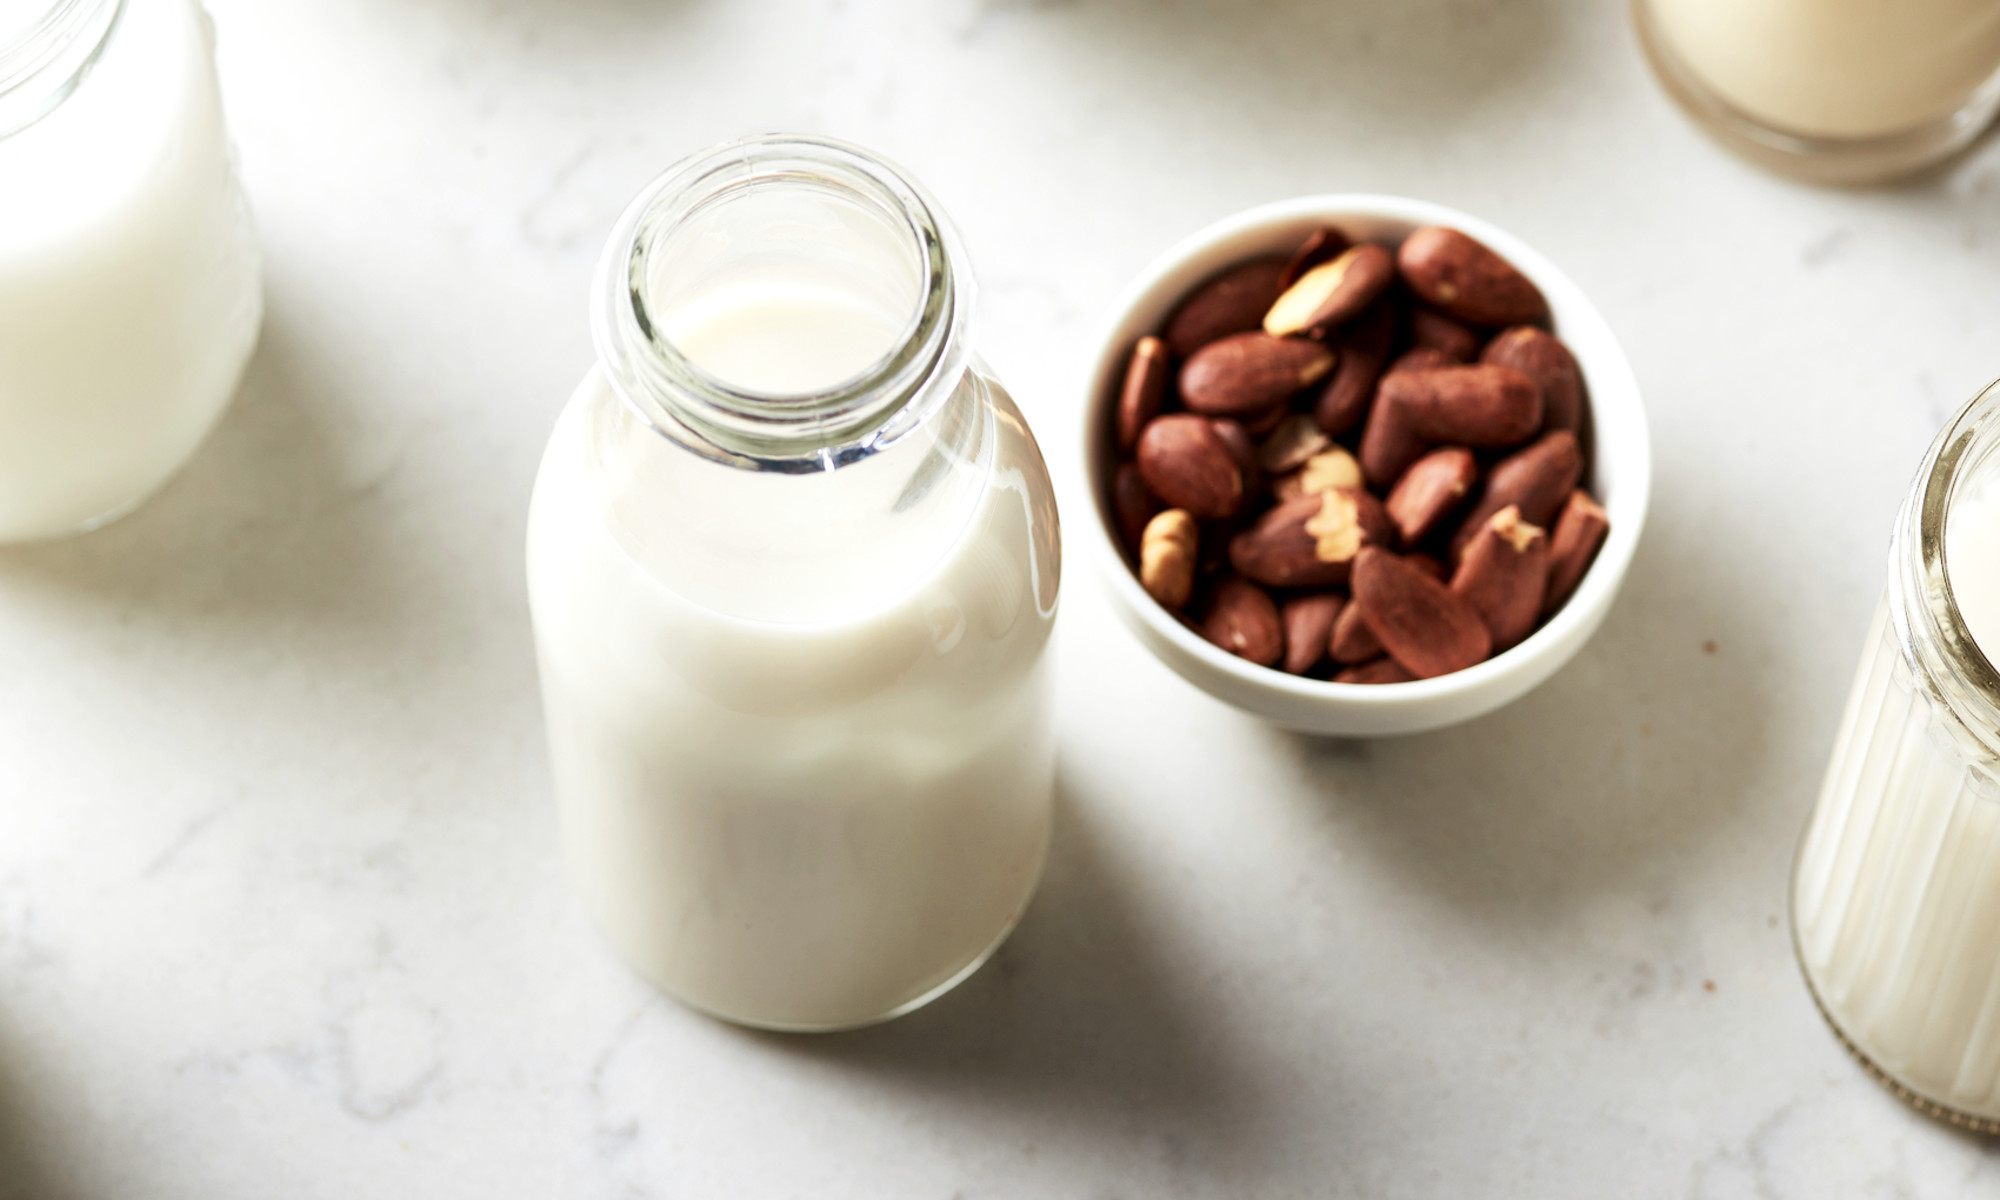 Is Almond Milk Good For You? Here Are The Top Pros & Cons